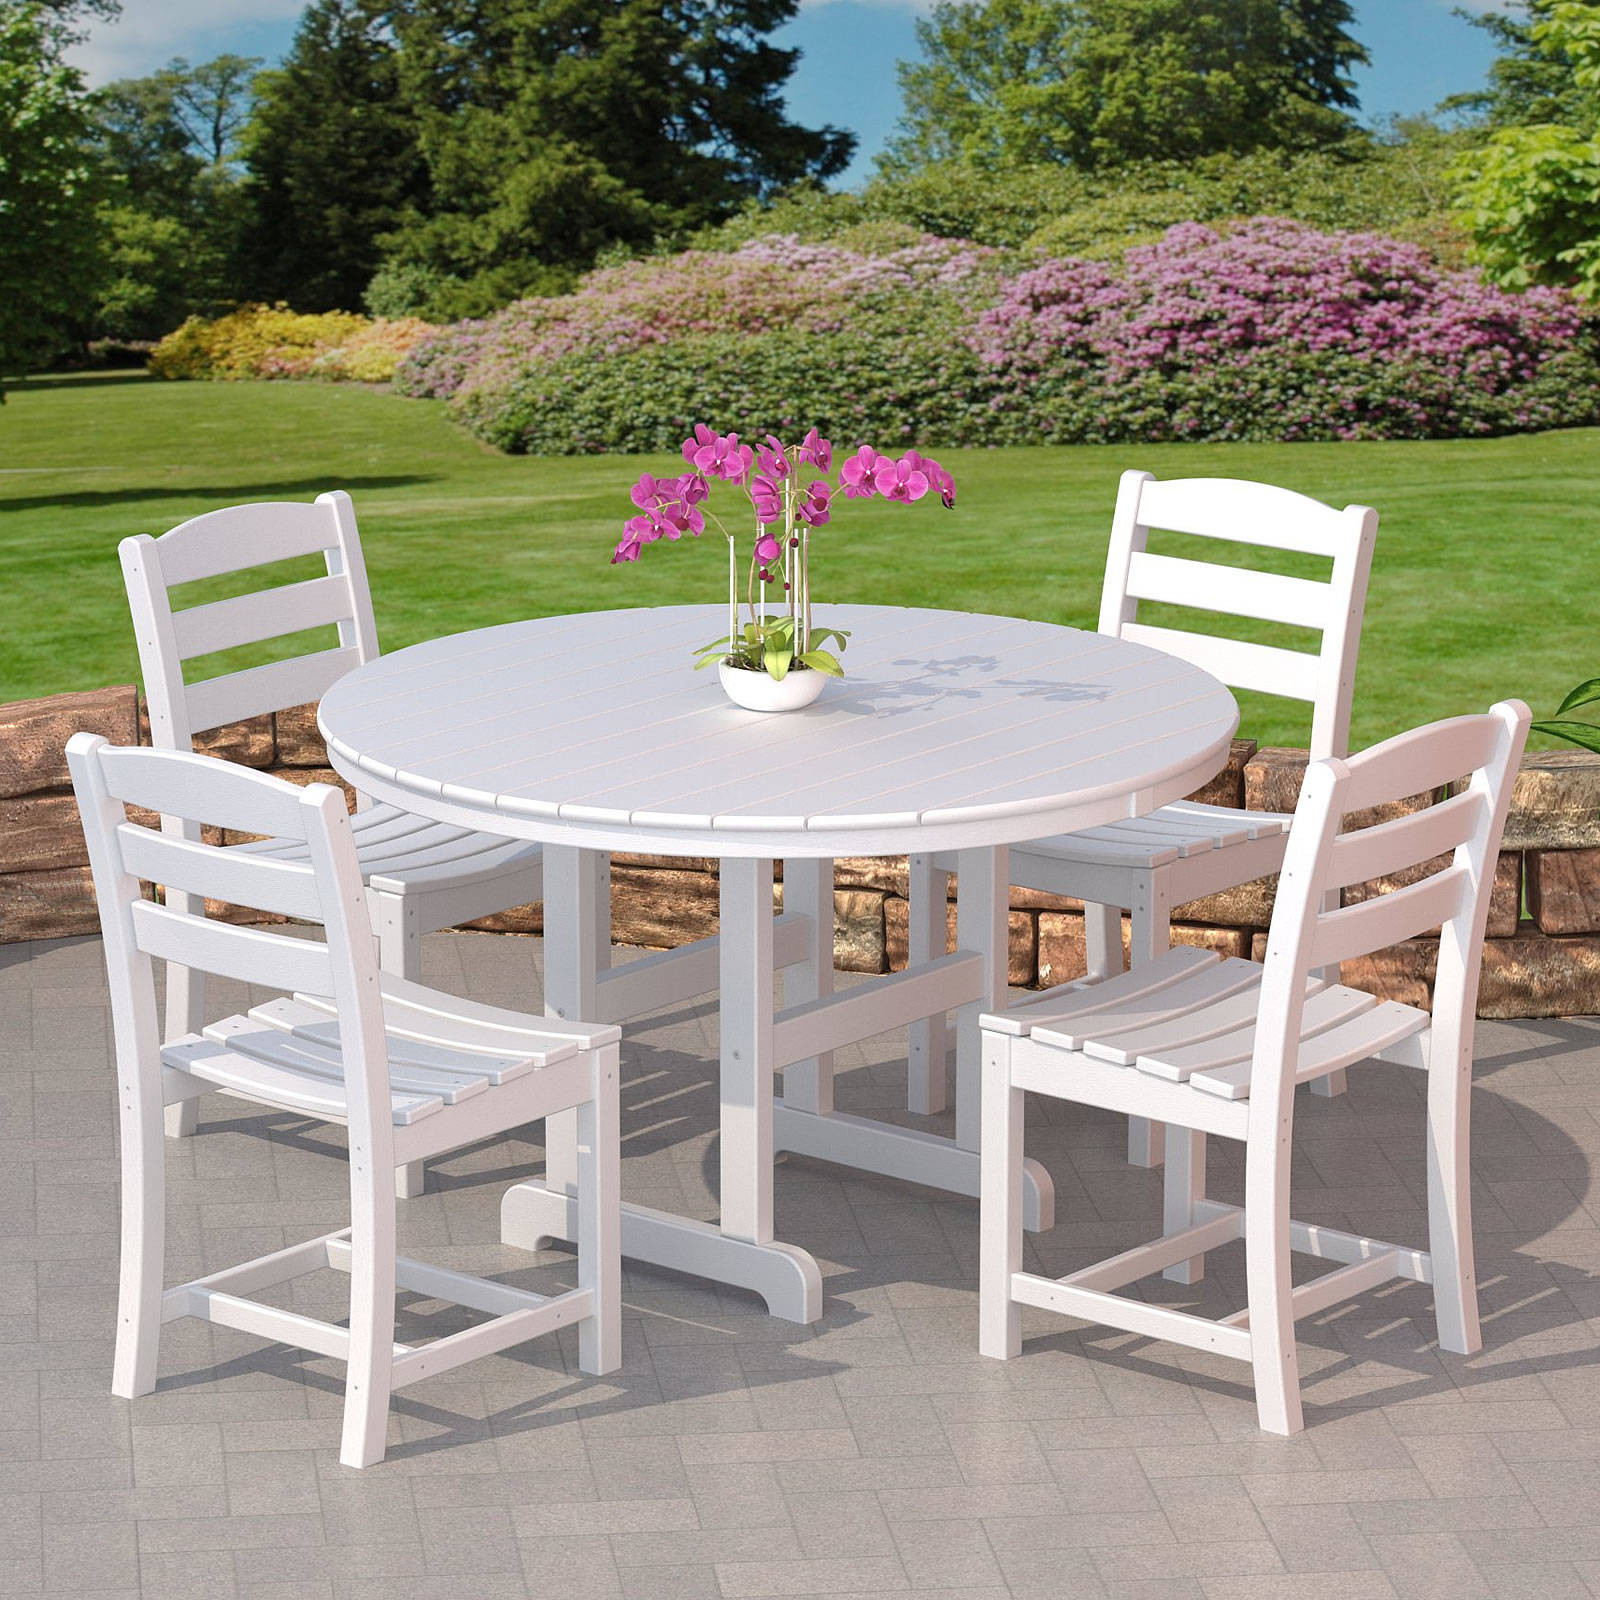 Best ideas about Polywood Patio Furniture
. Save or Pin POLYWOOD La Casa Cafe Outdoor Dining Set Now.